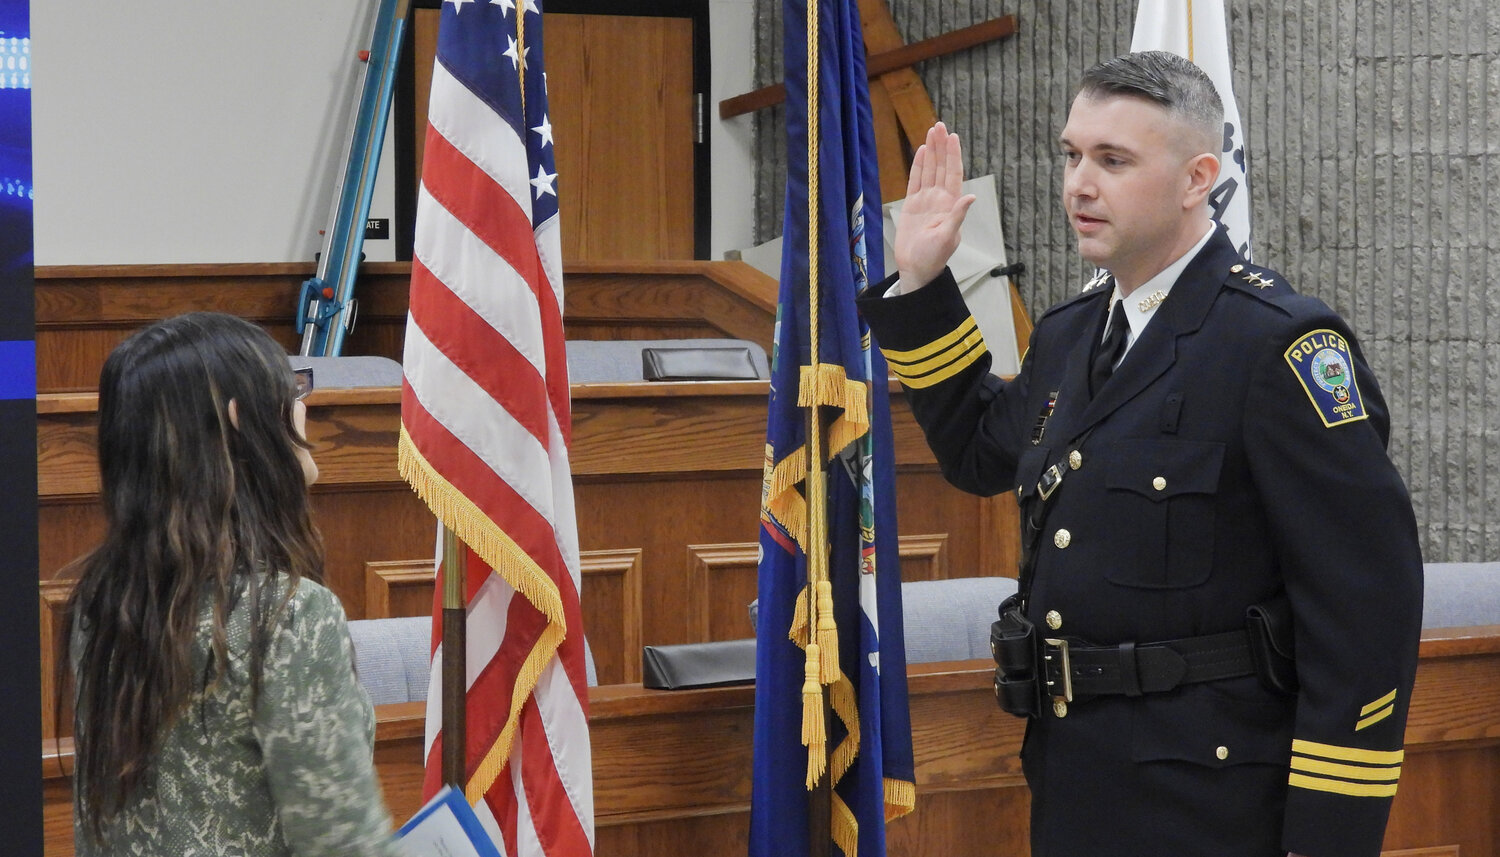 Oneida Police Chief Steven Lowell takes his oath of office at a swearing-in ceremony in the Oneida Common Council on Thursday, March 9